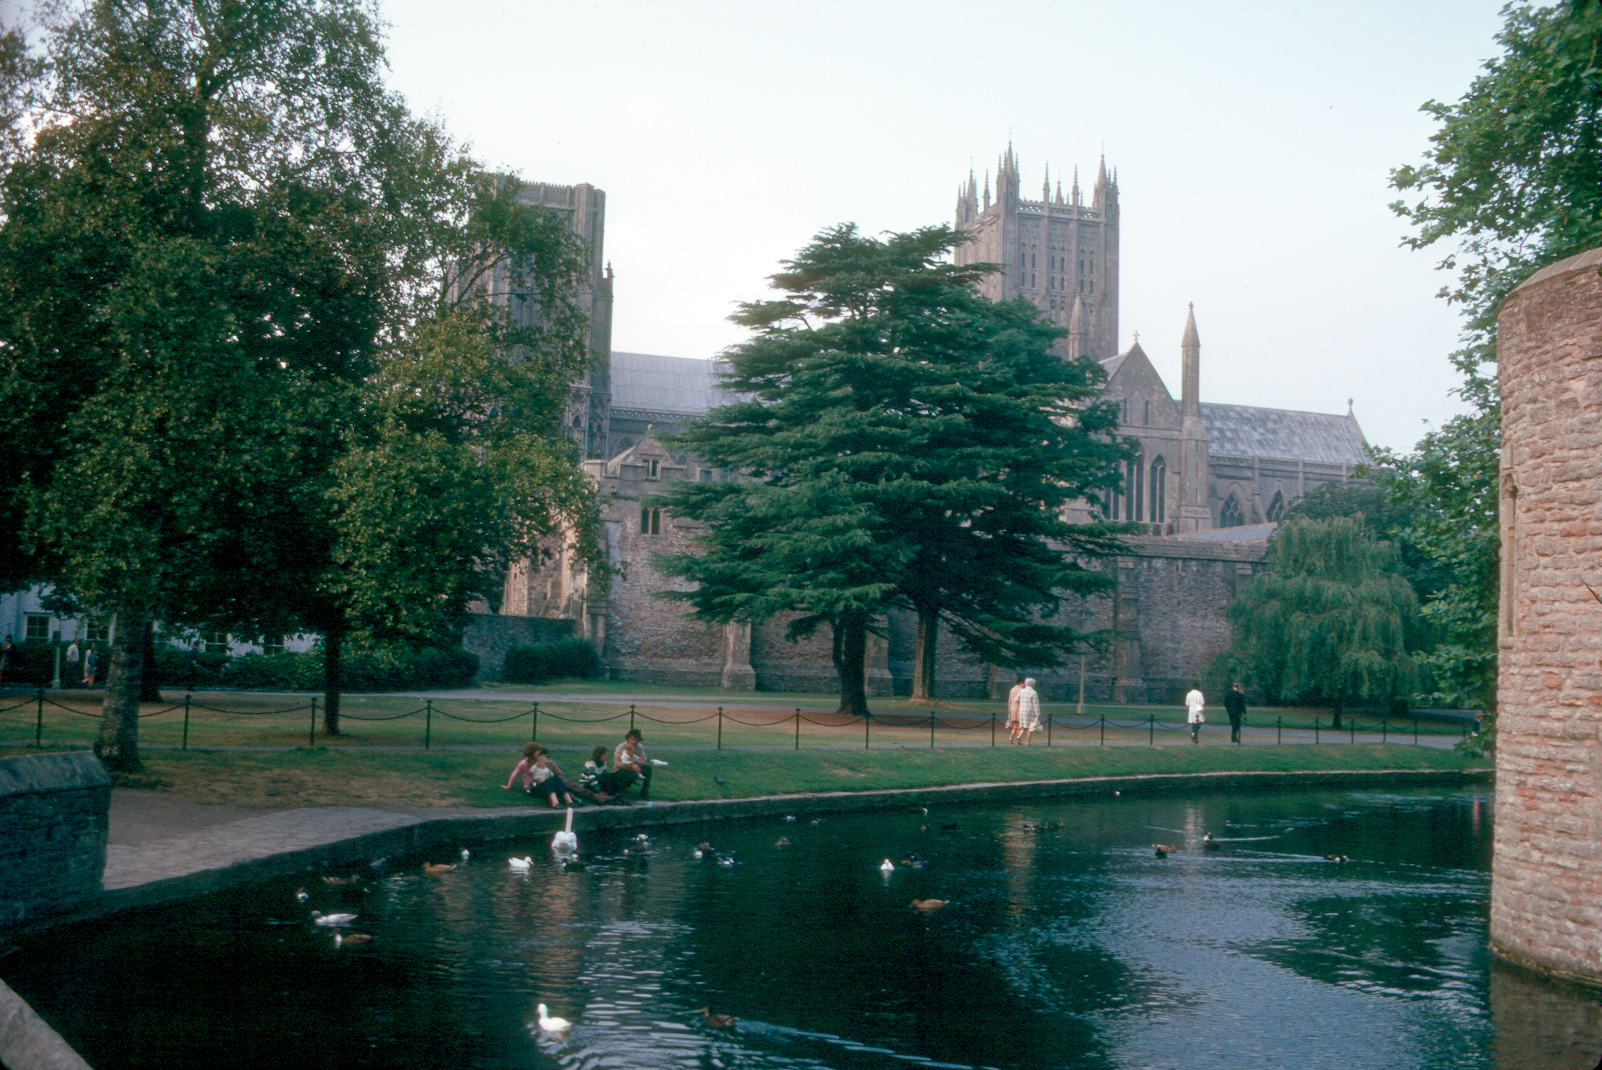 7203404k Sept 1972 - It's holiday time again. This is Wells Cathedral.